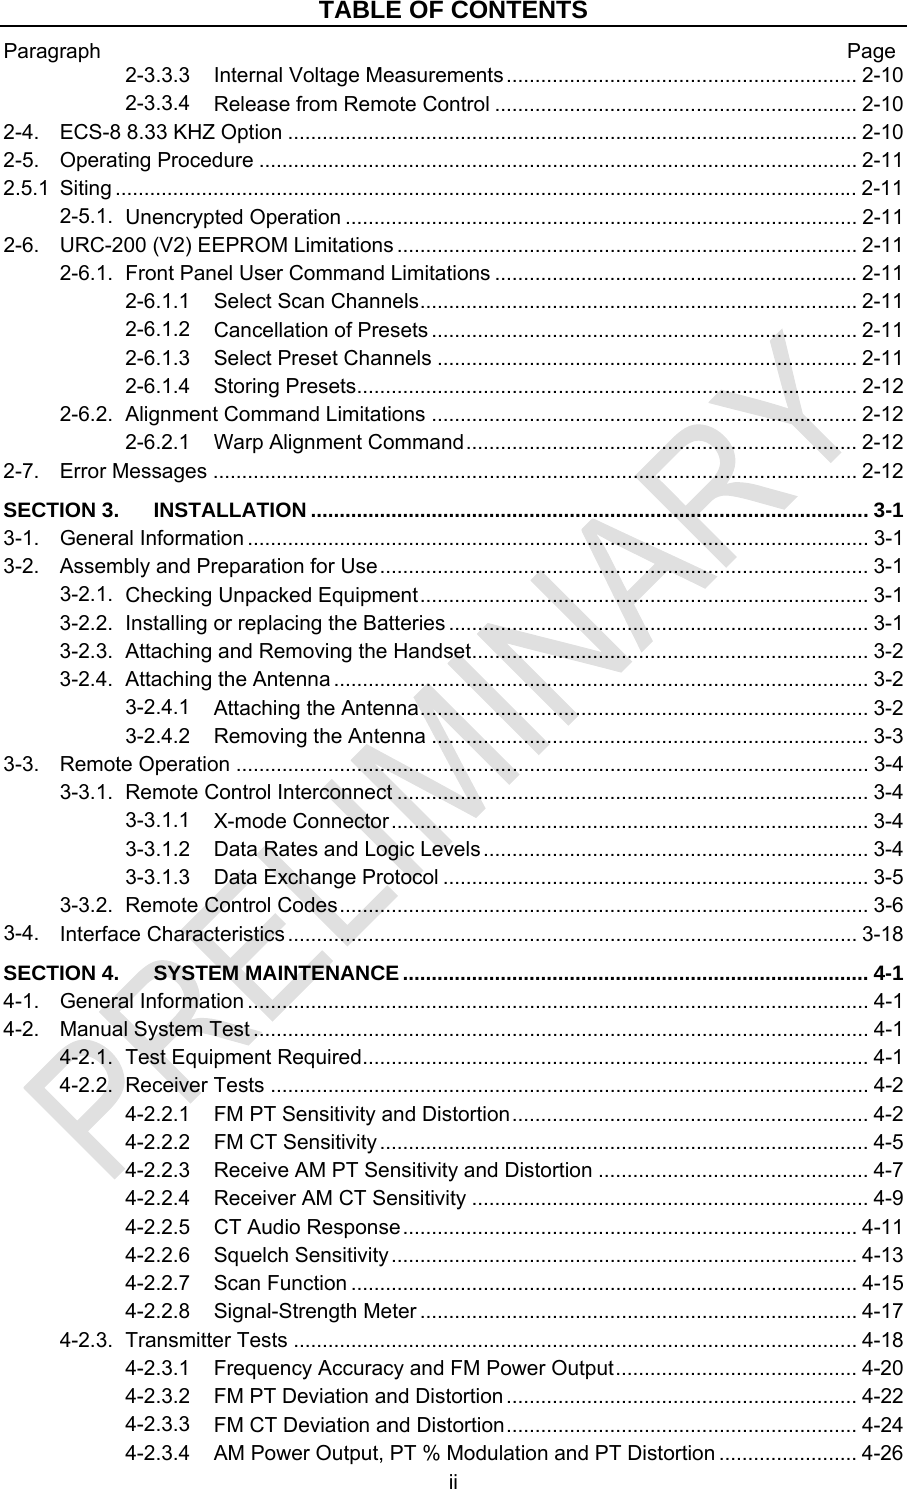 TABLE OF CONTENTS Paragraph  Page ii 2-3.3.3 ............................................................. 2-10 Internal Voltage Measurements2-3.3.4 ............................................................... 2-10 Release from Remote Control2-4. ................................................................................................... 2-10 ECS-8 8.33 KHZ Option2-5. ........................................................................................................ 2-11 Operating Procedure2.5.1 ................................................................................................................................. 2-11 Siting2-5.1. ......................................................................................... 2-11 Unencrypted Operation2-6. ................................................................................ 2-11 URC-200 (V2) EEPROM Limitations2-6.1. ............................................................... 2-11 Front Panel User Command Limitations2-6.1.1 ............................................................................ 2-11 Select Scan Channels2-6.1.2 .......................................................................... 2-11 Cancellation of Presets2-6.1.3 ......................................................................... 2-11 Select Preset Channels2-6.1.4 ....................................................................................... 2-12 Storing Presets2-6.2. .......................................................................... 2-12 Alignment Command Limitations2-6.2.1 .................................................................... 2-12 Warp Alignment Command2-7. ................................................................................................................ 2-12 Error MessagesSECTION 3. ................................................................................................. 3-1 INSTALLATION3-1. ............................................................................................................ 3-1 General Information3-2. ..................................................................................... 3-1 Assembly and Preparation for Use3-2.1. .............................................................................. 3-1 Checking Unpacked Equipment3-2.2. ......................................................................... 3-1 Installing or replacing the Batteries3-2.3. ..................................................................... 3-2 Attaching and Removing the Handset3-2.4. ............................................................................................. 3-2 Attaching the Antenna3-2.4.1 .............................................................................. 3-2 Attaching the Antenna3-2.4.2 ............................................................................ 3-3 Removing the Antenna3-3. .............................................................................................................. 3-4 Remote Operation3-3.1. .................................................................................. 3-4 Remote Control Interconnect3-3.1.1 ................................................................................... 3-4 X-mode Connector3-3.1.2 ................................................................... 3-4 Data Rates and Logic Levels3-3.1.3 .......................................................................... 3-5 Data Exchange Protocol3-3.2. ............................................................................................ 3-6 Remote Control Codes3-4. ................................................................................................... 3-18 Interface CharacteristicsSECTION 4. ................................................................................. 4-1 SYSTEM MAINTENANCE4-1. ............................................................................................................ 4-1 General Information4-2. ........................................................................................................... 4-1 Manual System Test4-2.1. ........................................................................................ 4-1 Test Equipment Required4-2.2. ........................................................................................................ 4-2 Receiver Tests4-2.2.1 .............................................................. 4-2 FM PT Sensitivity and Distortion4-2.2.2 ..................................................................................... 4-5 FM CT Sensitivity4-2.2.3 ............................................... 4-7 Receive AM PT Sensitivity and Distortion4-2.2.4 ..................................................................... 4-9 Receiver AM CT Sensitivity4-2.2.5 ............................................................................... 4-11 CT Audio Response4-2.2.6 ................................................................................. 4-13 Squelch Sensitivity4-2.2.7 ........................................................................................ 4-15 Scan Function4-2.2.8 ............................................................................ 4-17 Signal-Strength Meter4-2.3. .................................................................................................. 4-18 Transmitter Tests4-2.3.1 .......................................... 4-20 Frequency Accuracy and FM Power Output4-2.3.2 ............................................................. 4-22 FM PT Deviation and Distortion4-2.3.3 ............................................................. 4-24 FM CT Deviation and Distortion4-2.3.4 ........................ 4-26 AM Power Output, PT % Modulation and PT Distortion